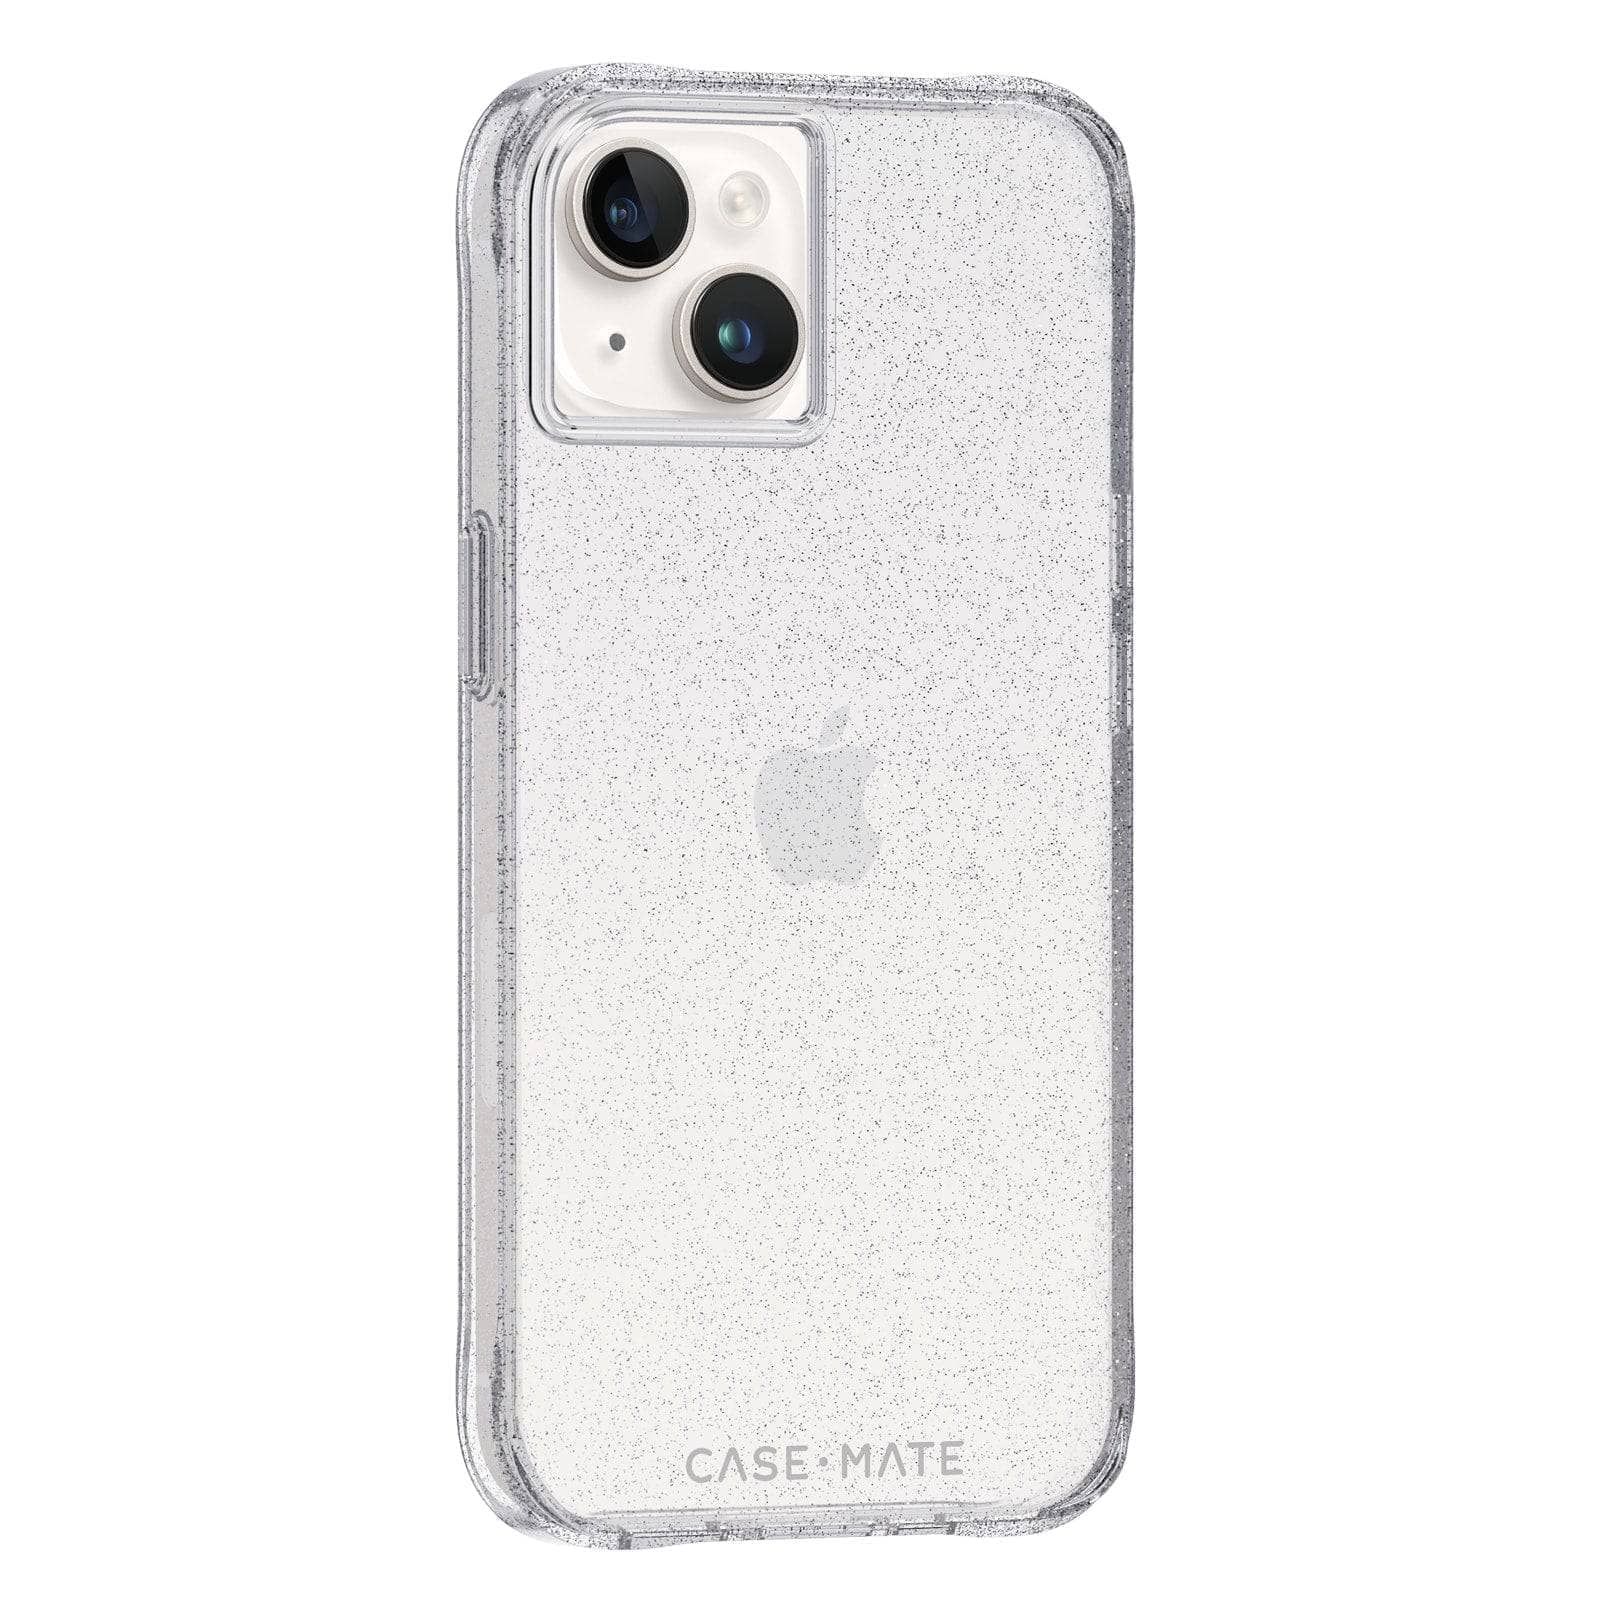 Case-Mate Sheer Crystal Case - For iPhone 14 Plus (6.7")-Cases - Cases-CASE-MATE-www.PhoneGuy.com.au